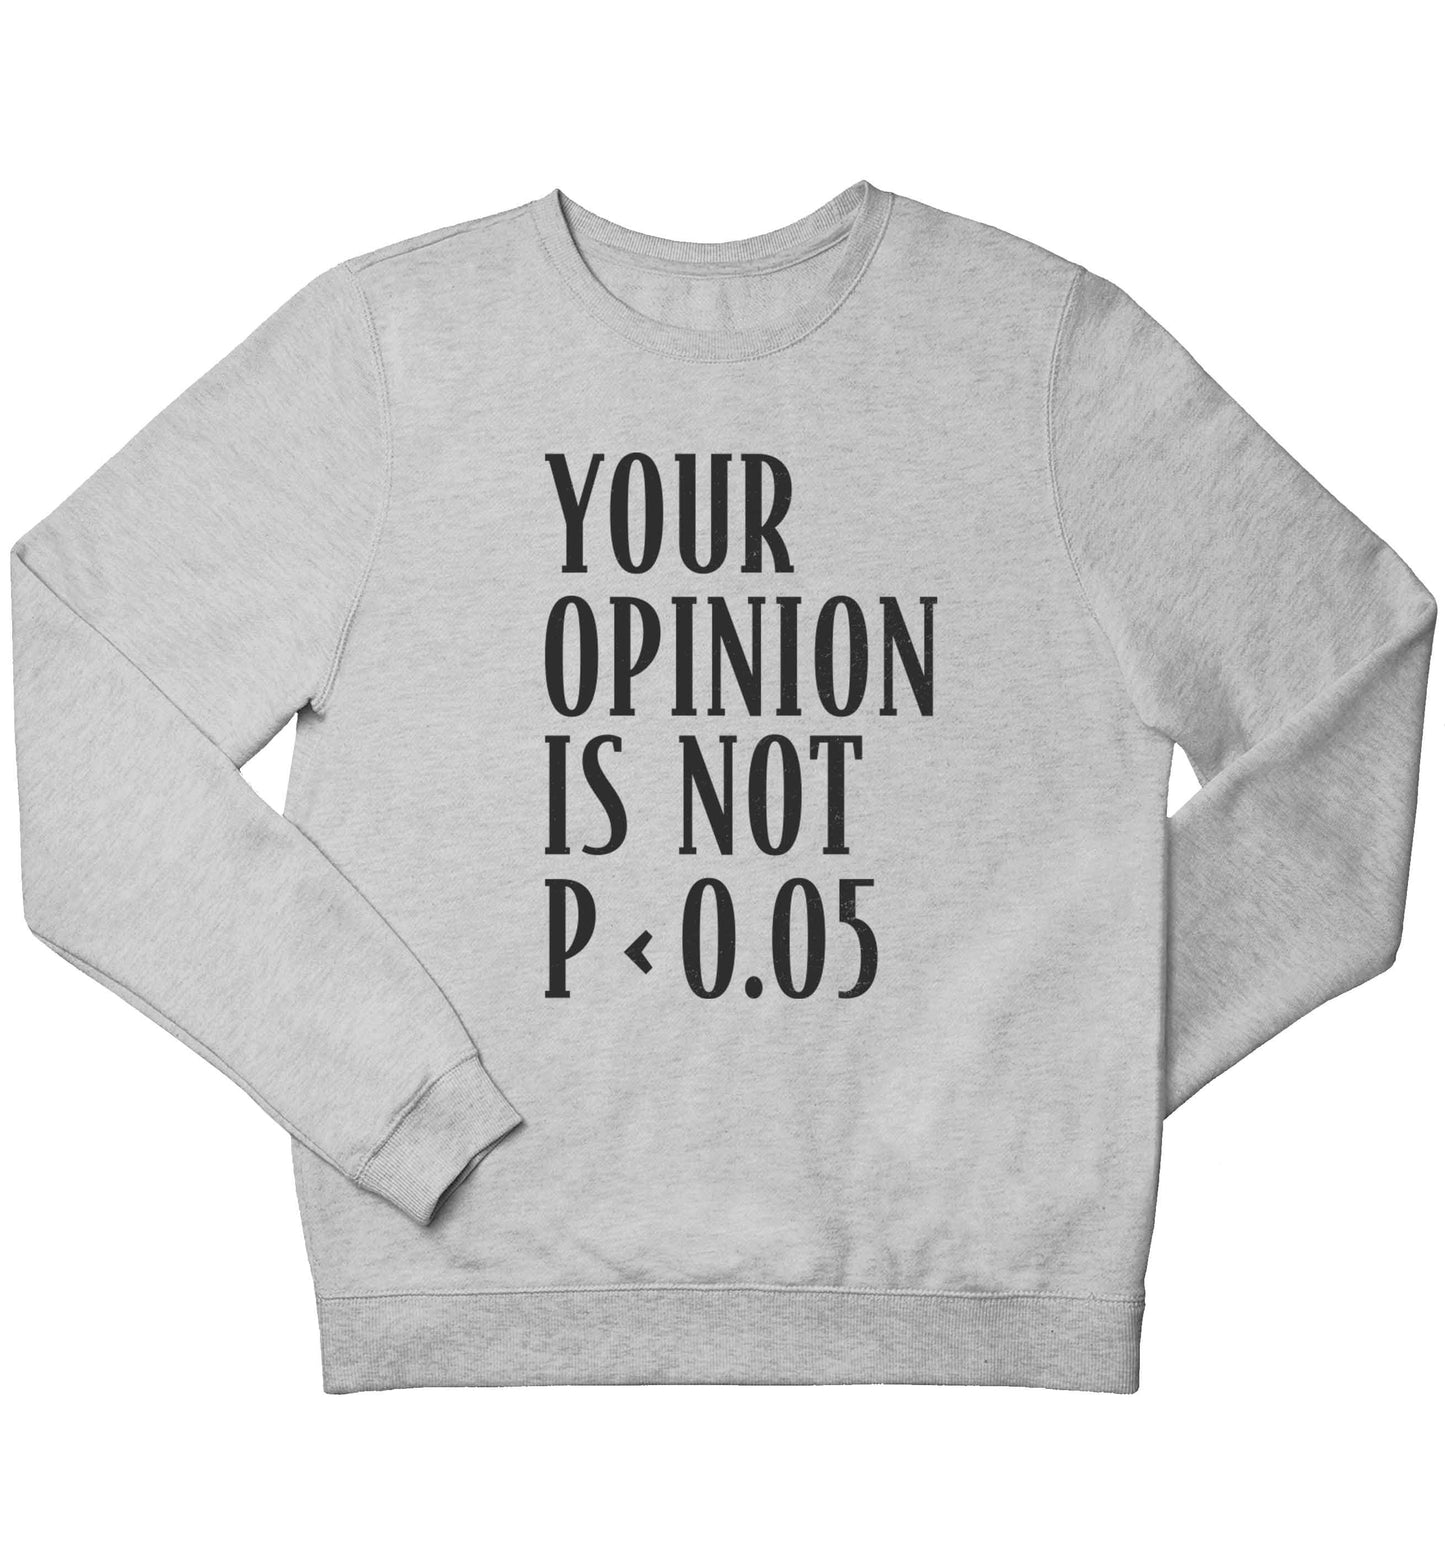 Your opinion is not P < 0.05children's grey sweater 12-13 Years